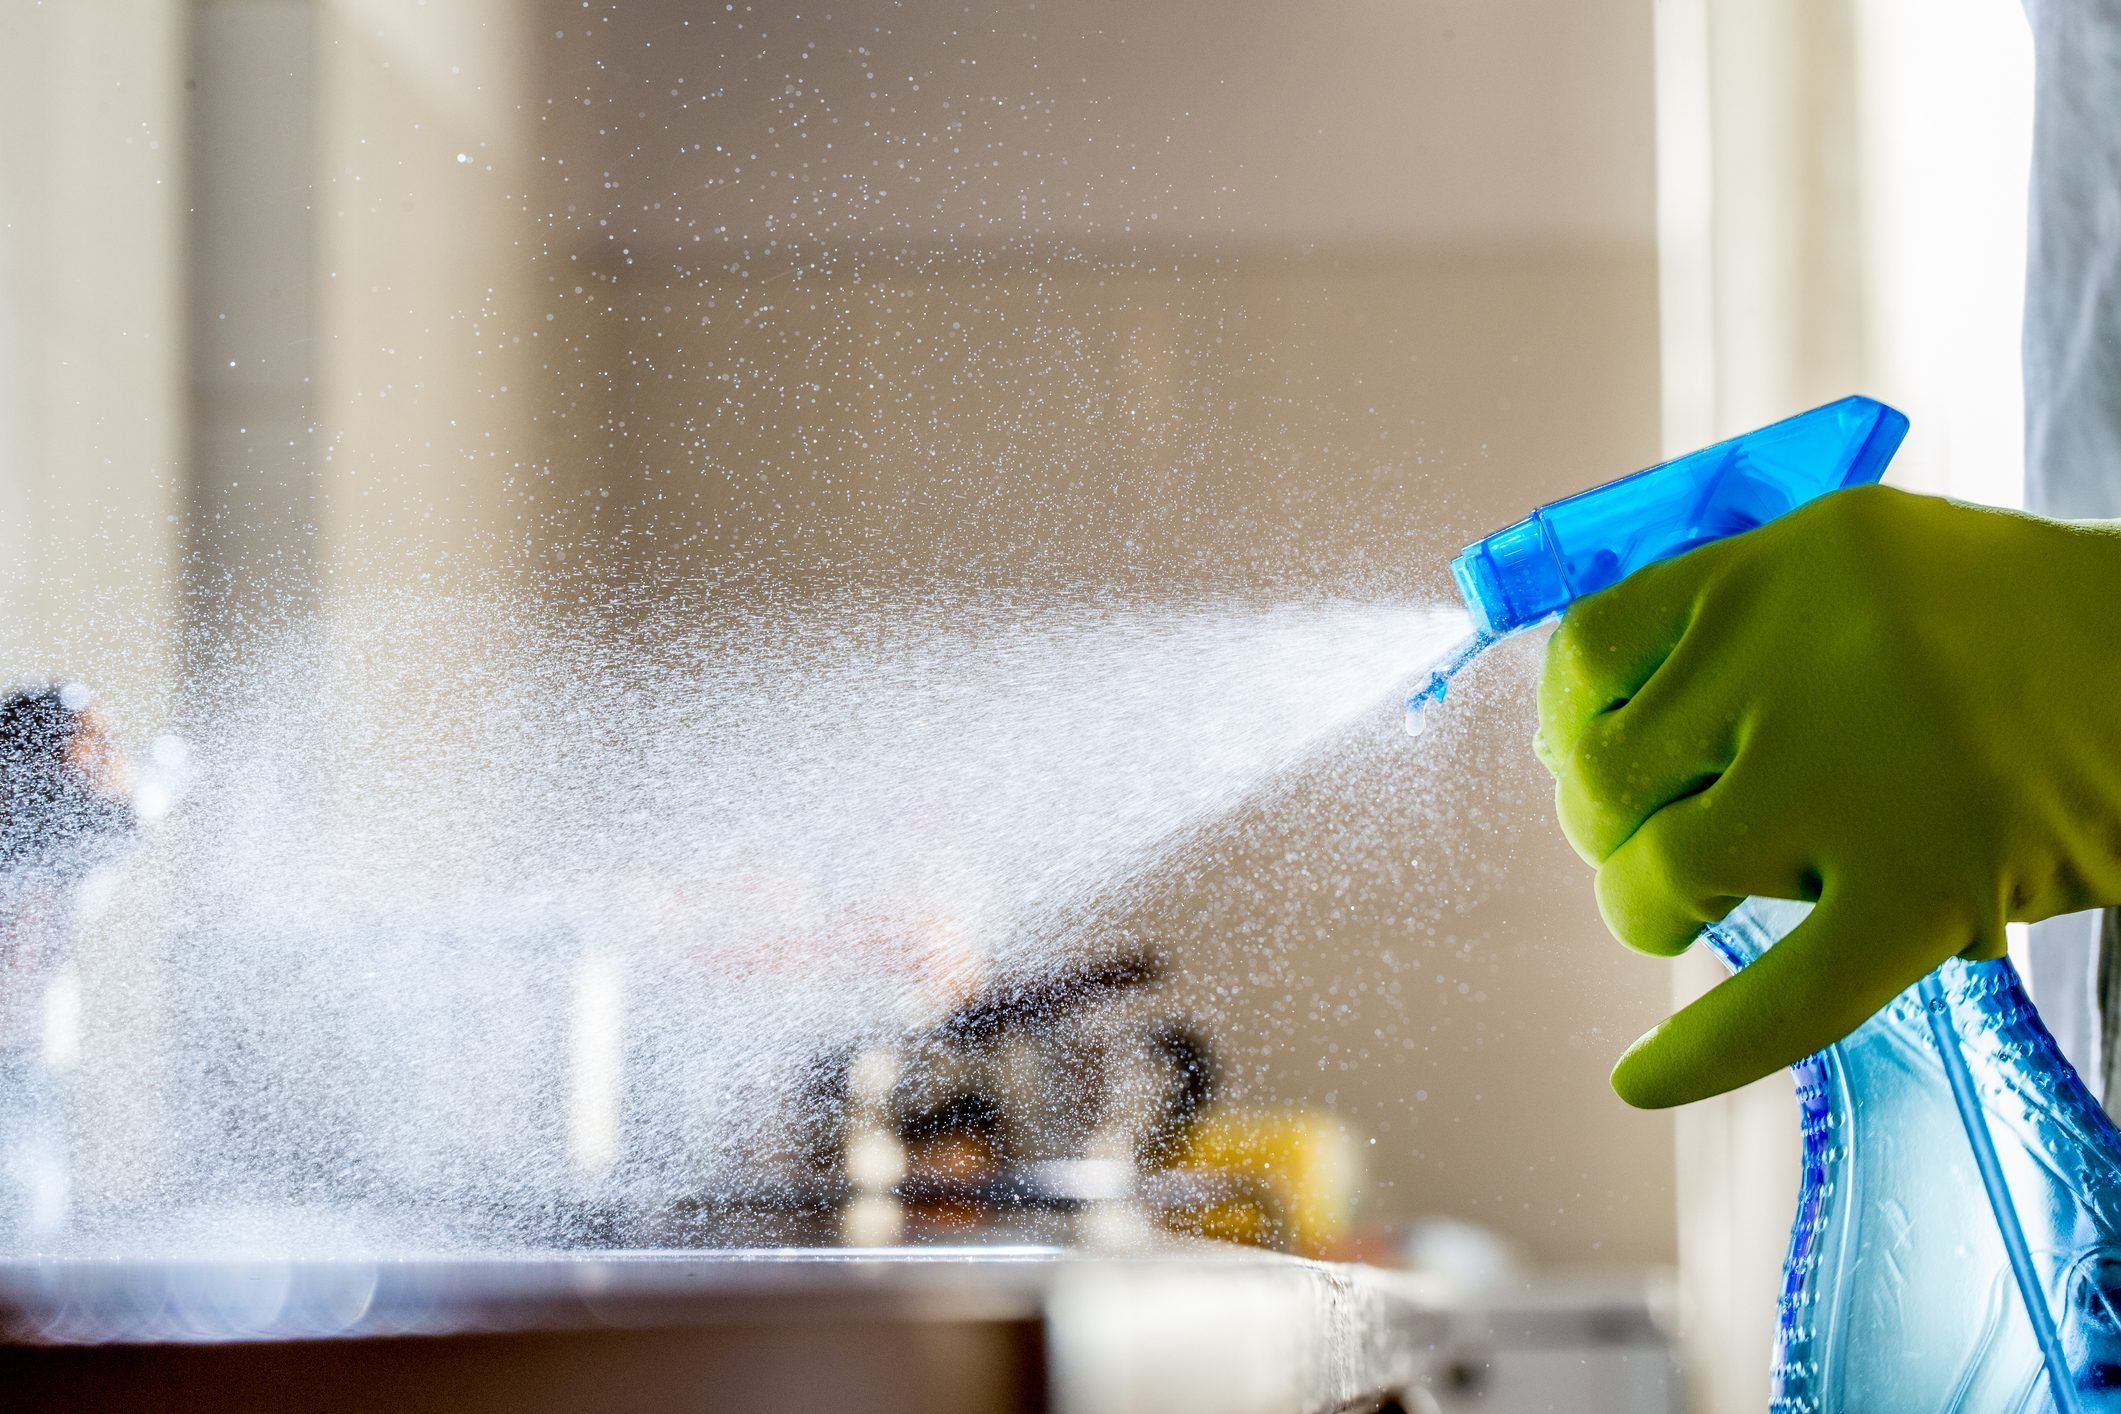 Spraying Cleaning Product on the Kitchen Counter